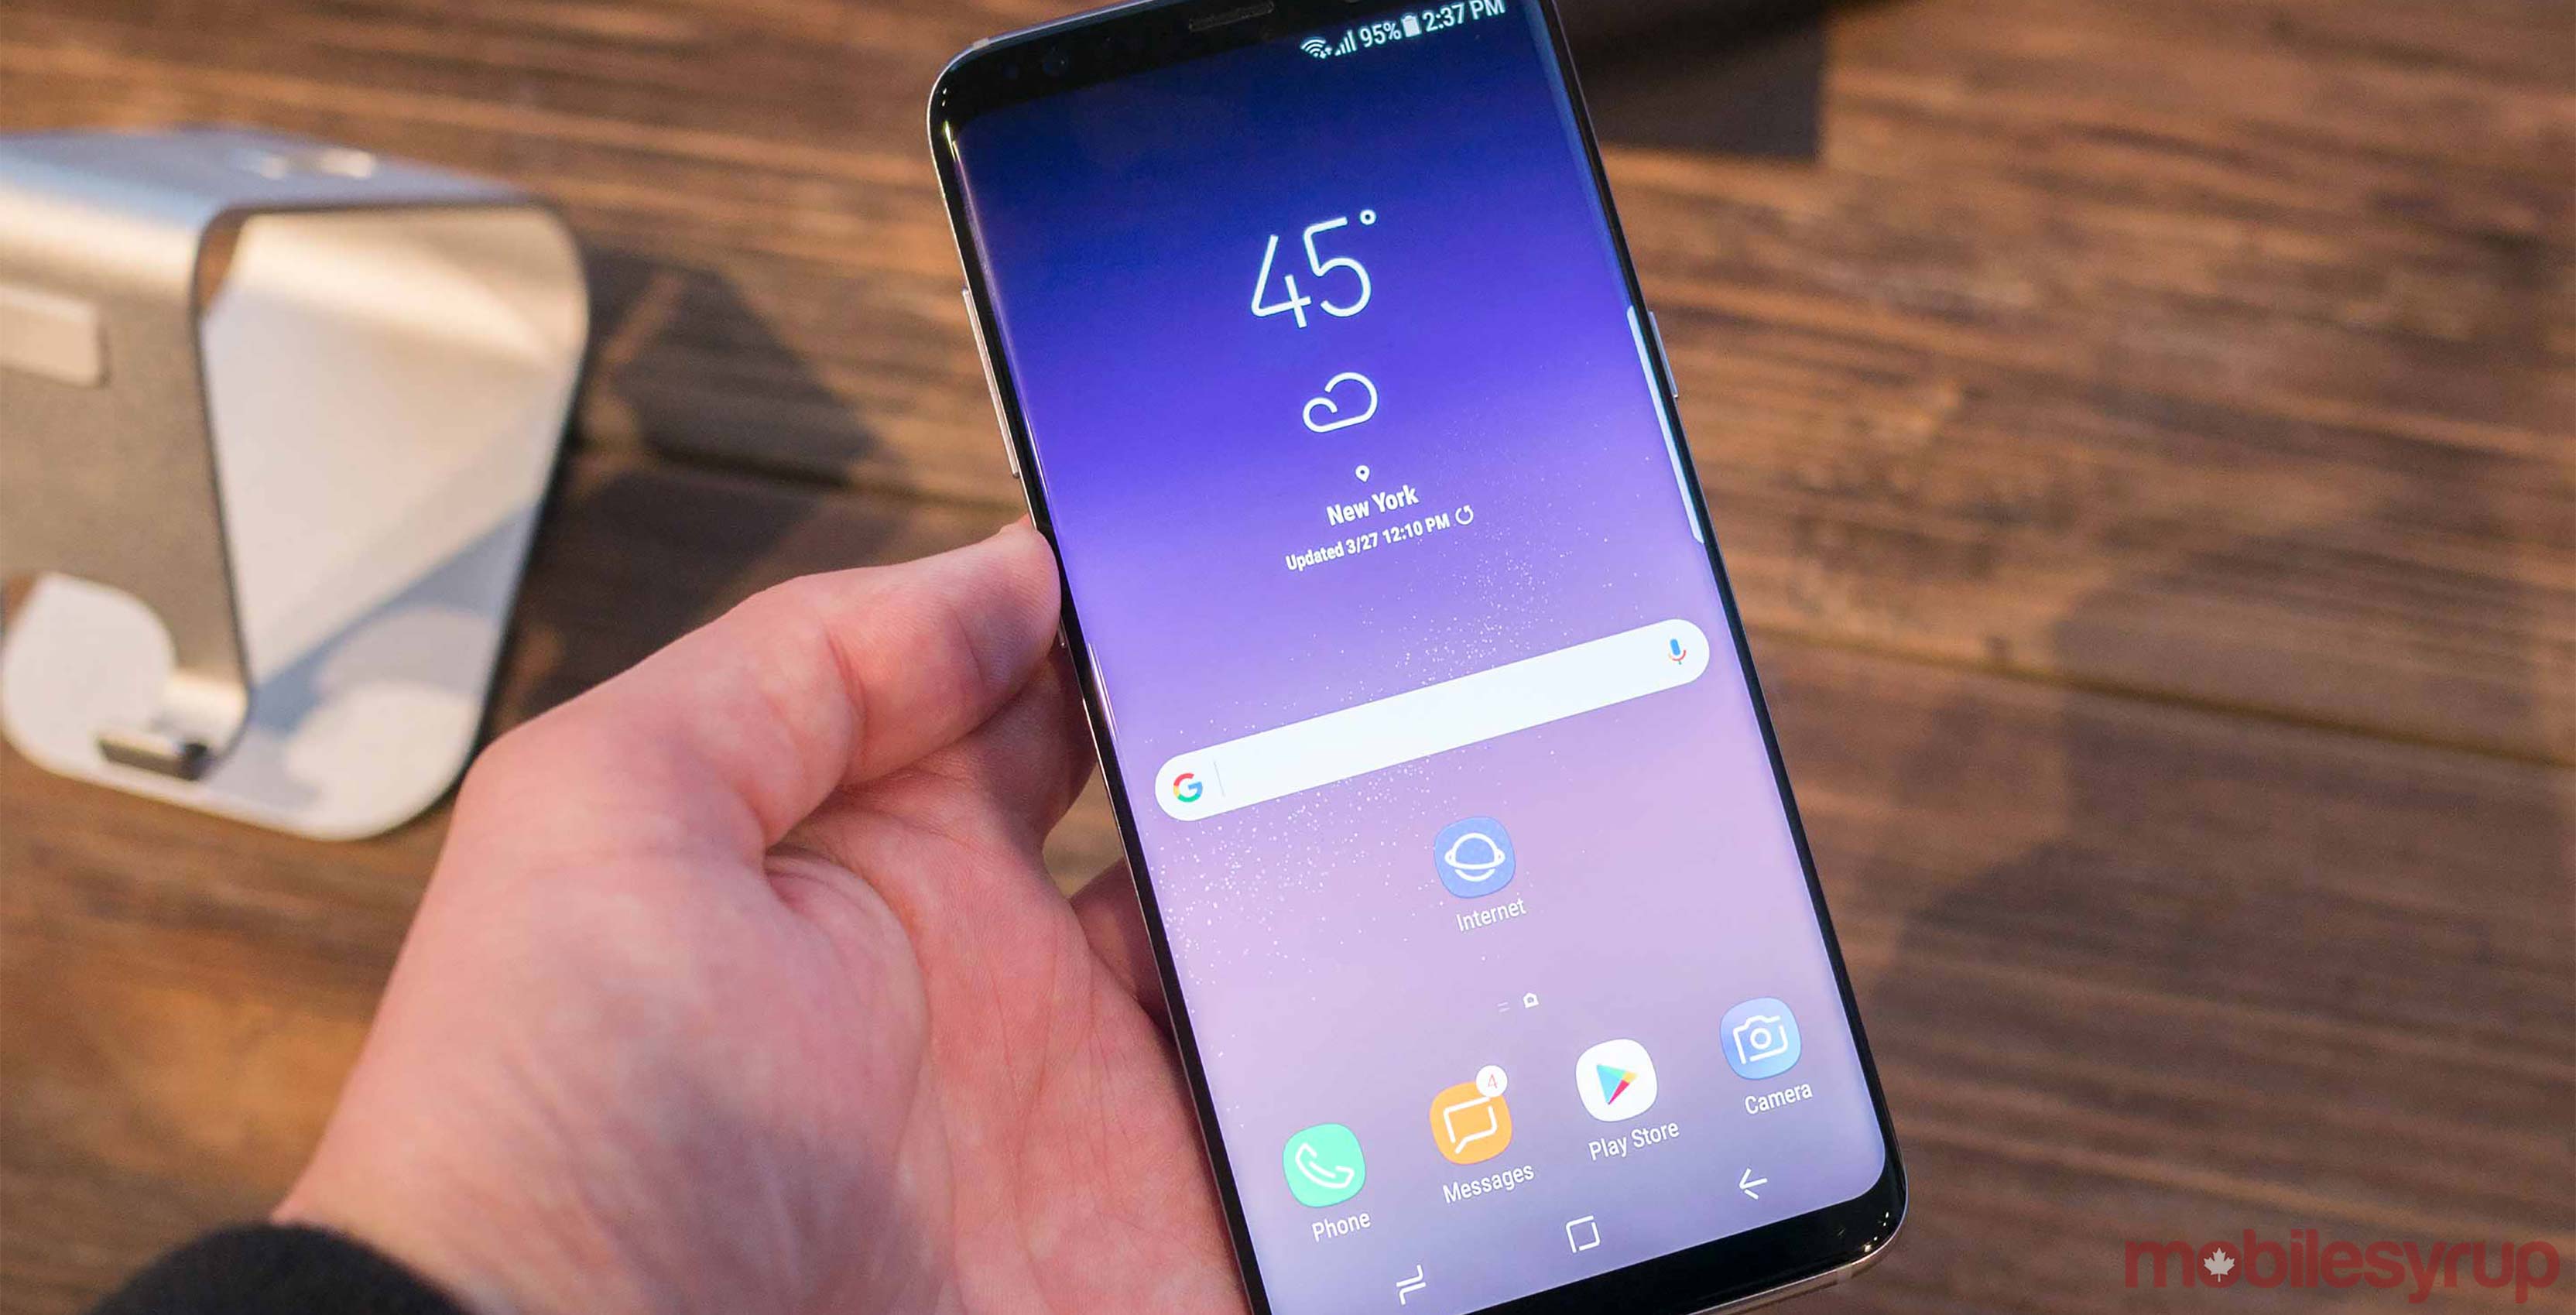 The S8's facial recognition feature can be bypassed with a photo